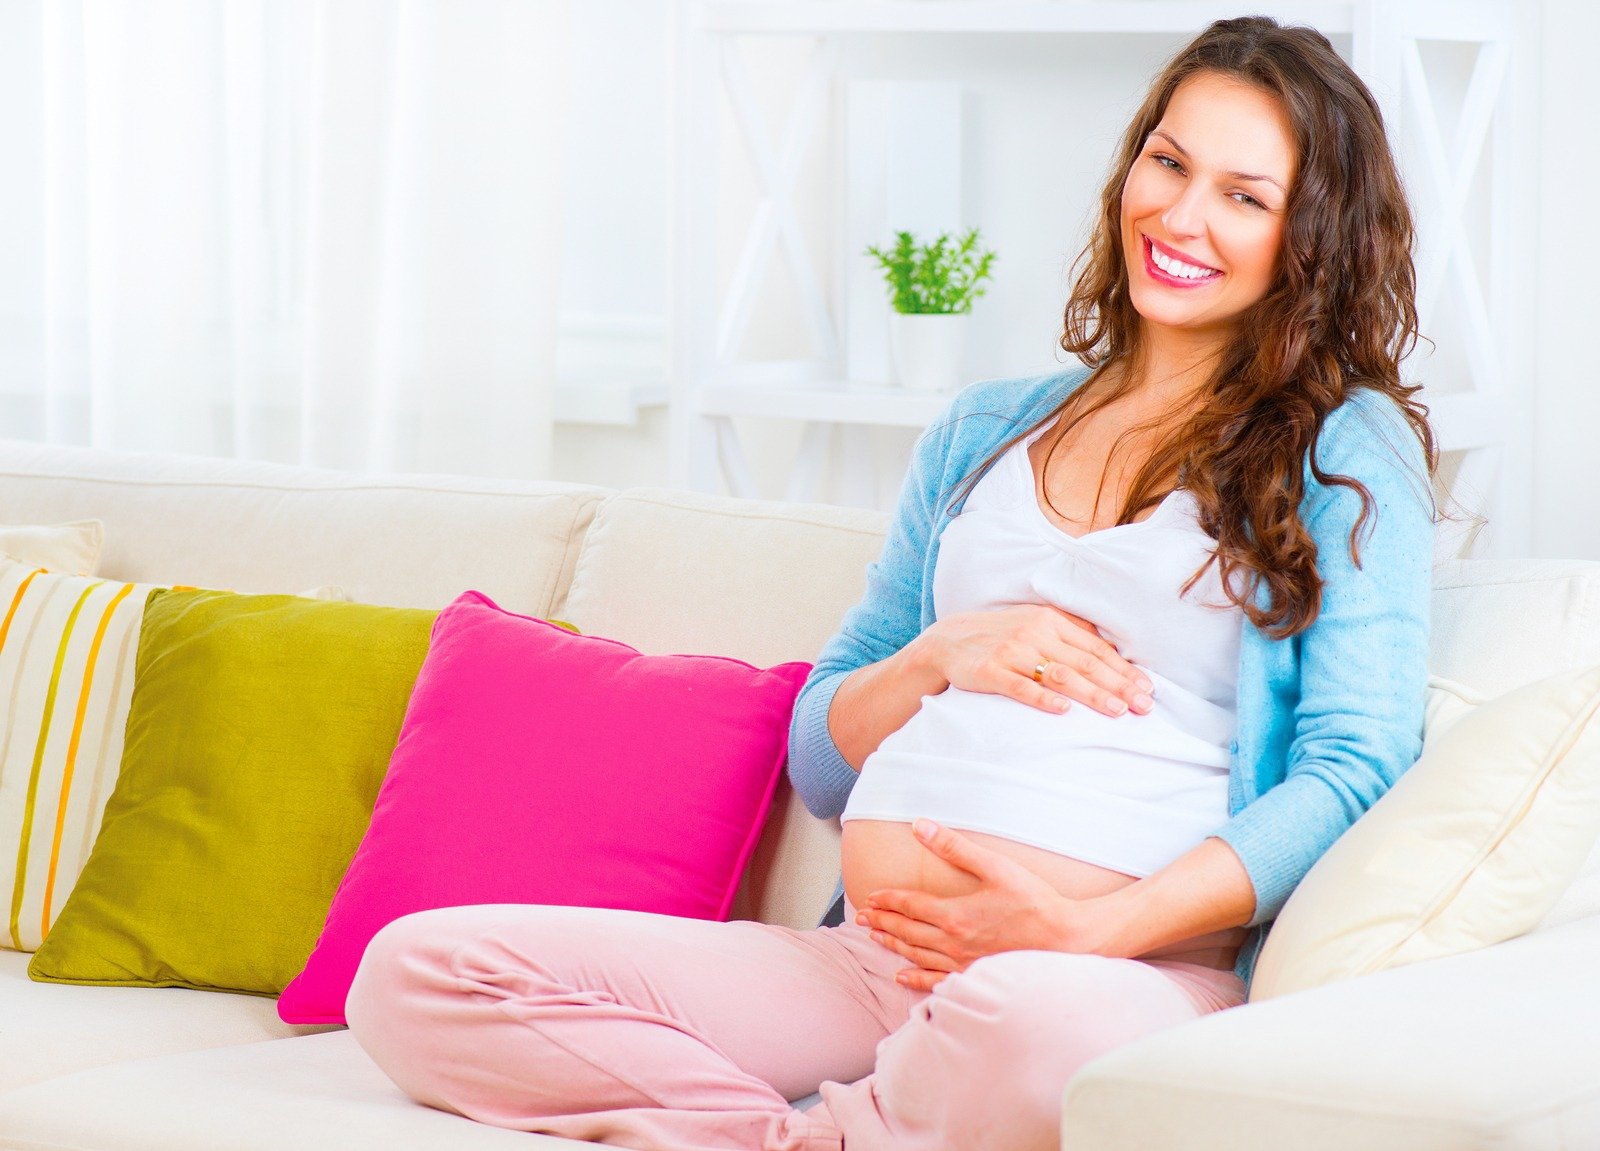 Pregnant Happy smiling Woman sitting on a sofa and caressing her belly. Mom Expecting Baby. Pregnant Woman Belly. Pregnancy. Beautiful Pregnant Woman. Maternity concept. Baby Shower